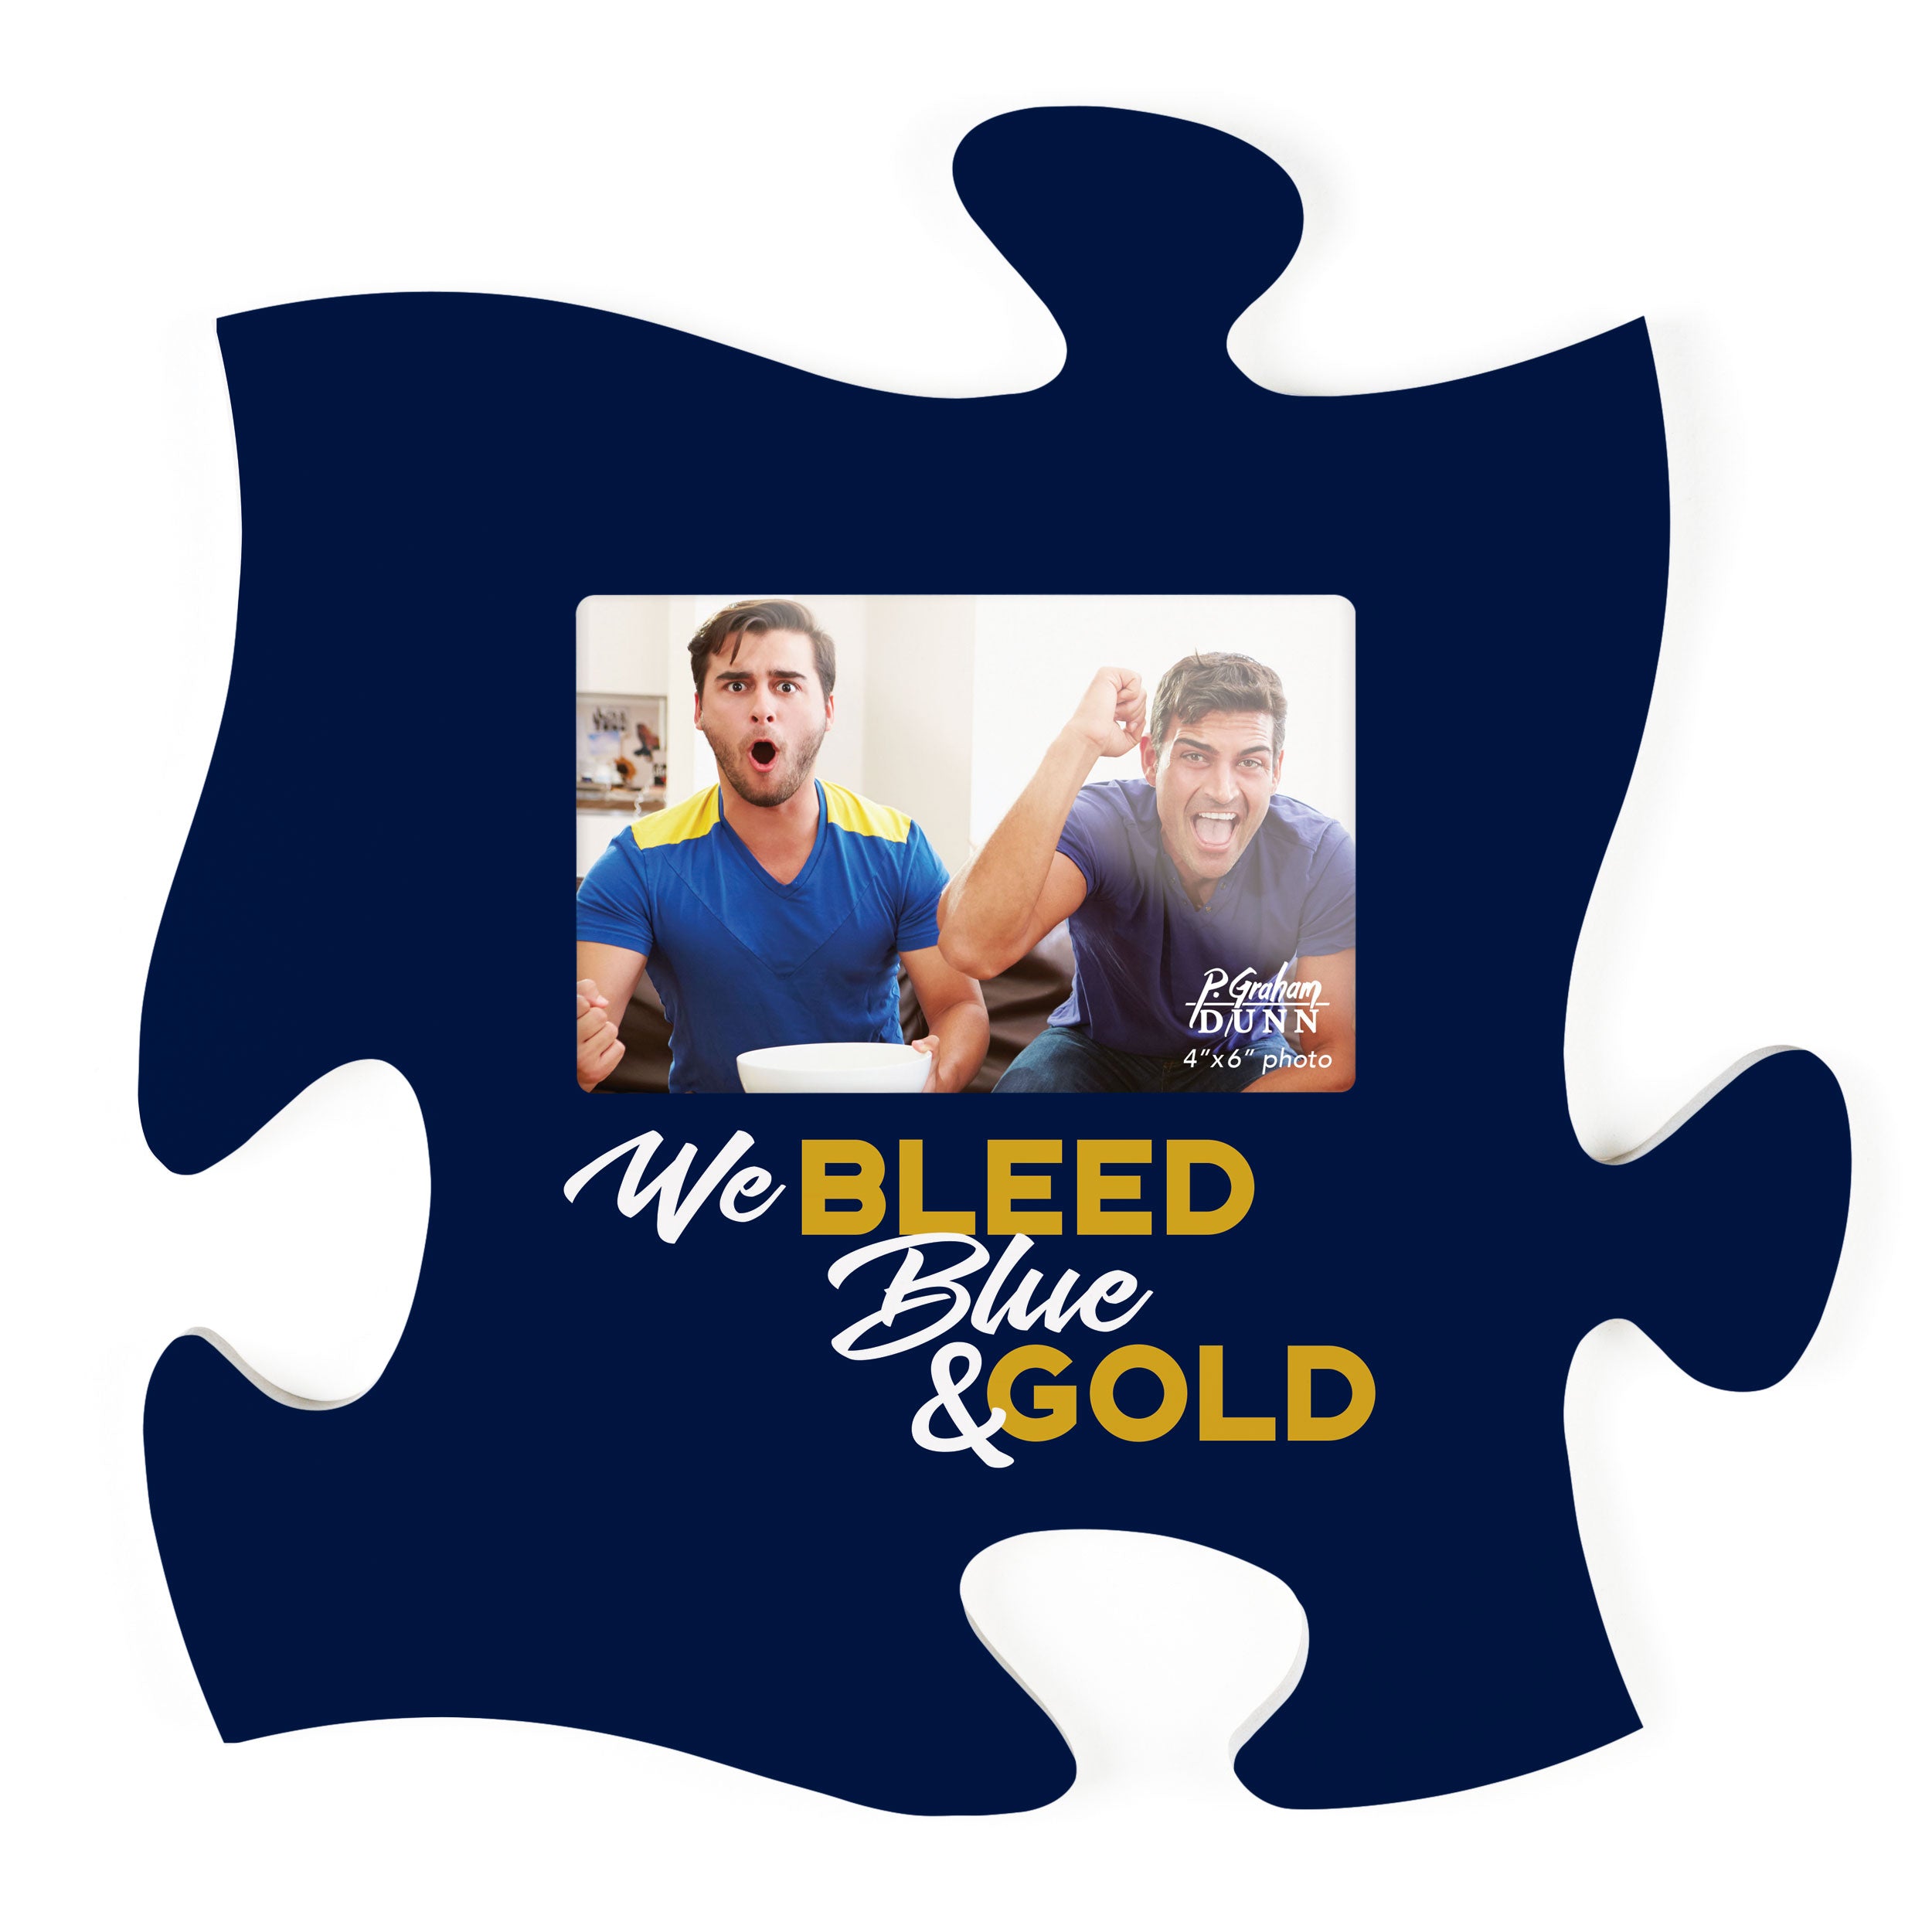 We Bleed Blue and Gold - University of Notre Dame Puzzle Piece Décor 12"X12"